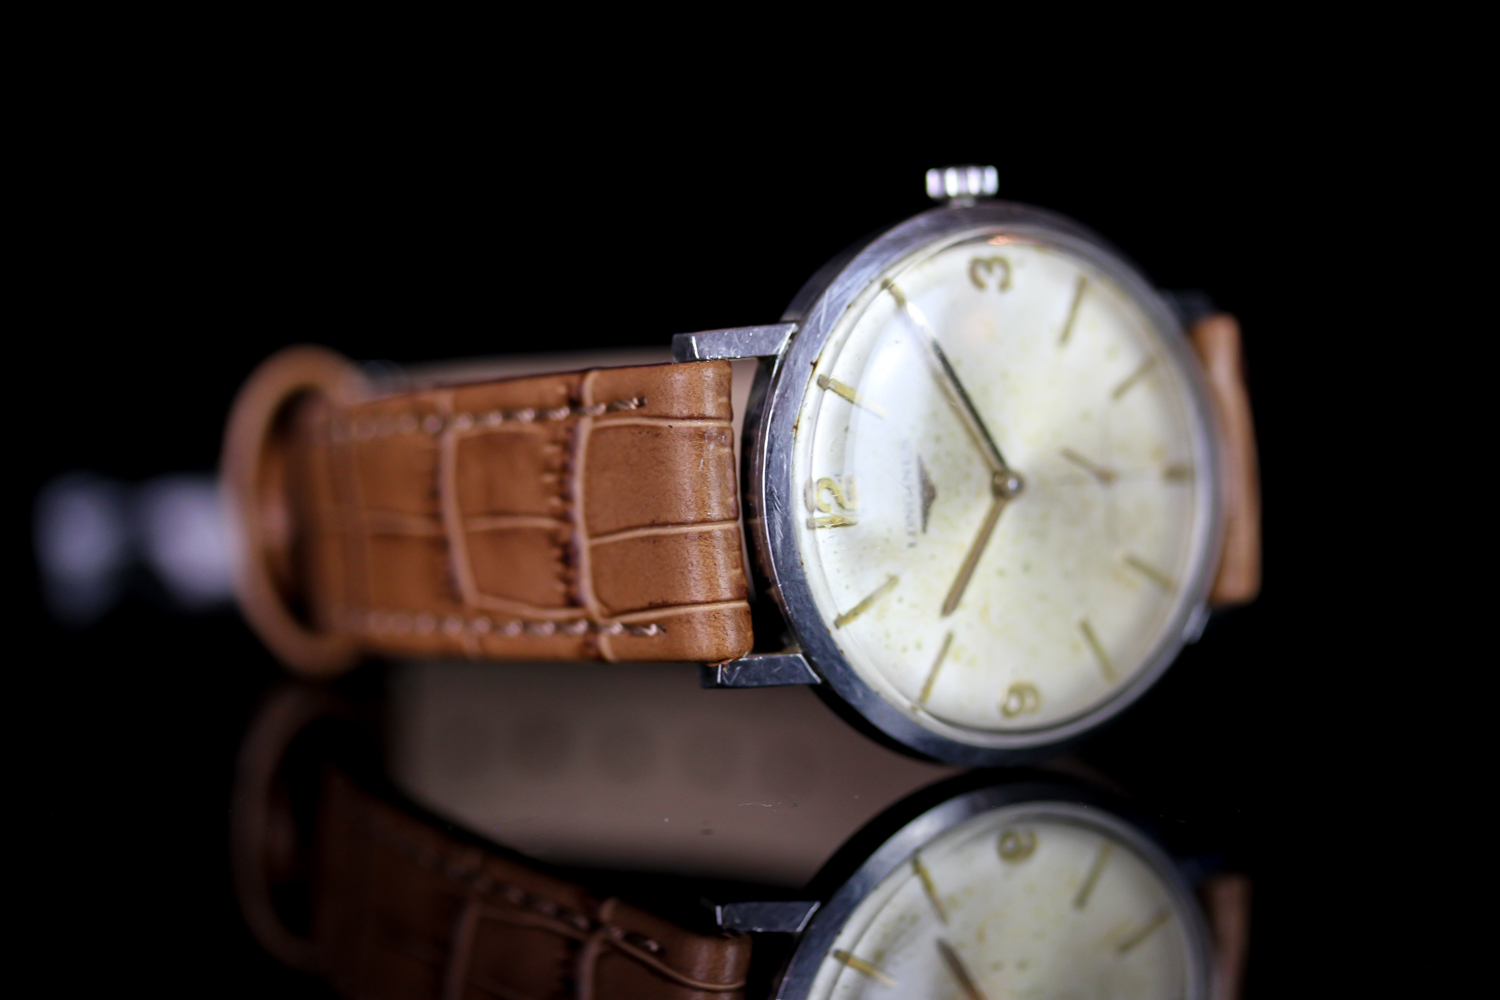 GENTLEMENS LONGINES CALATRAVA WRISTWATCH REF. 8236, circular patina dial with gold hour markers - Image 2 of 3